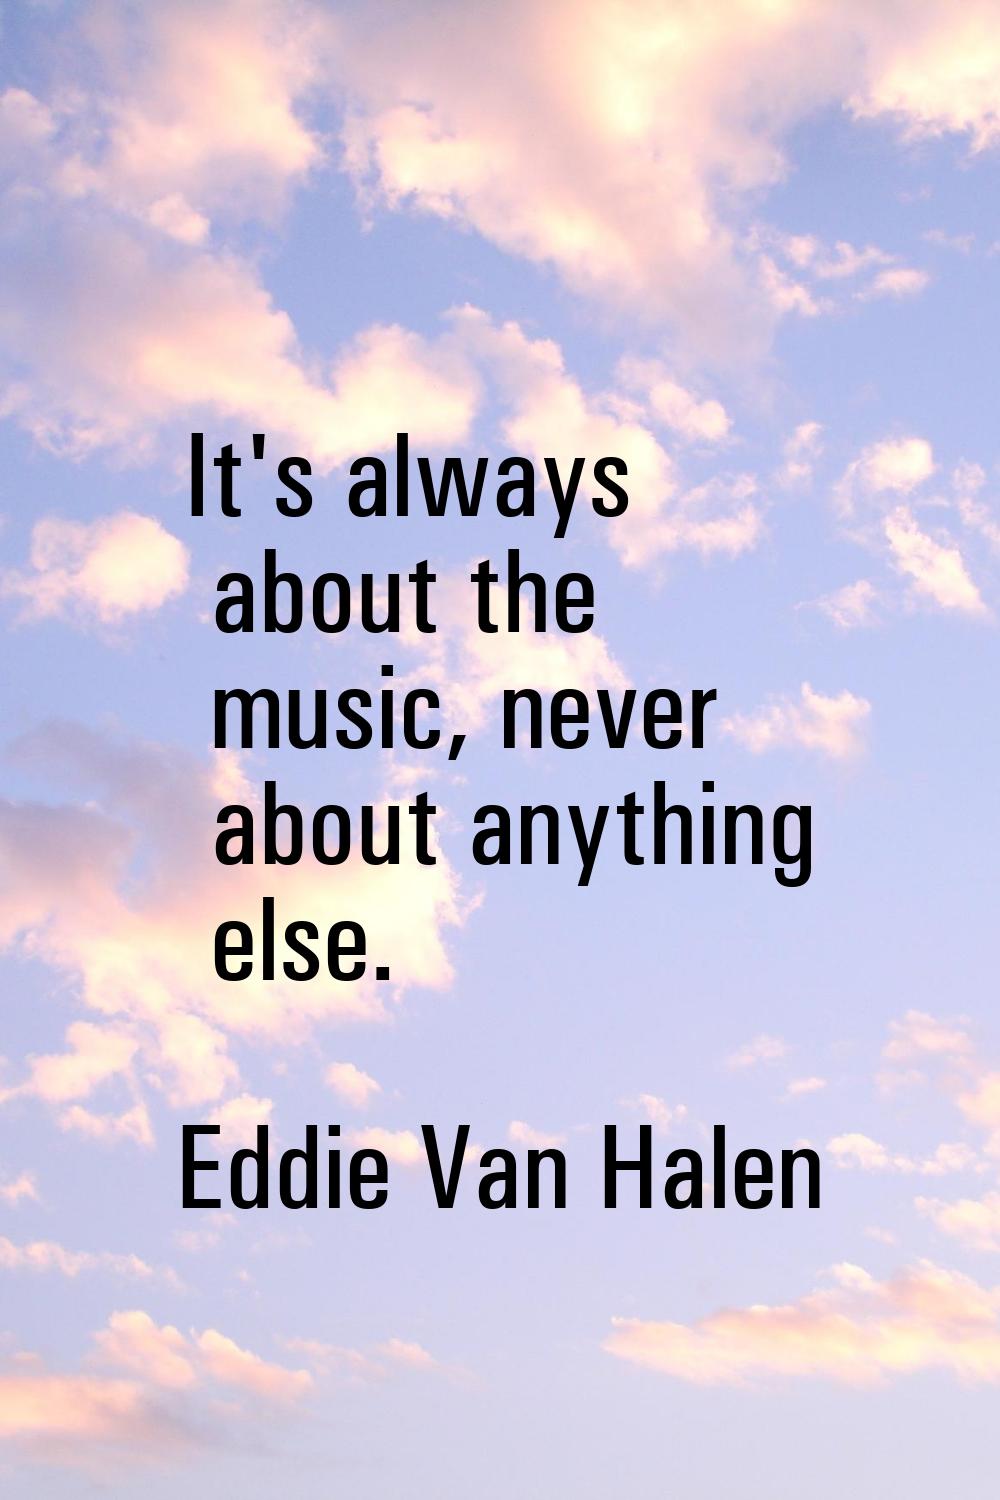 It's always about the music, never about anything else.